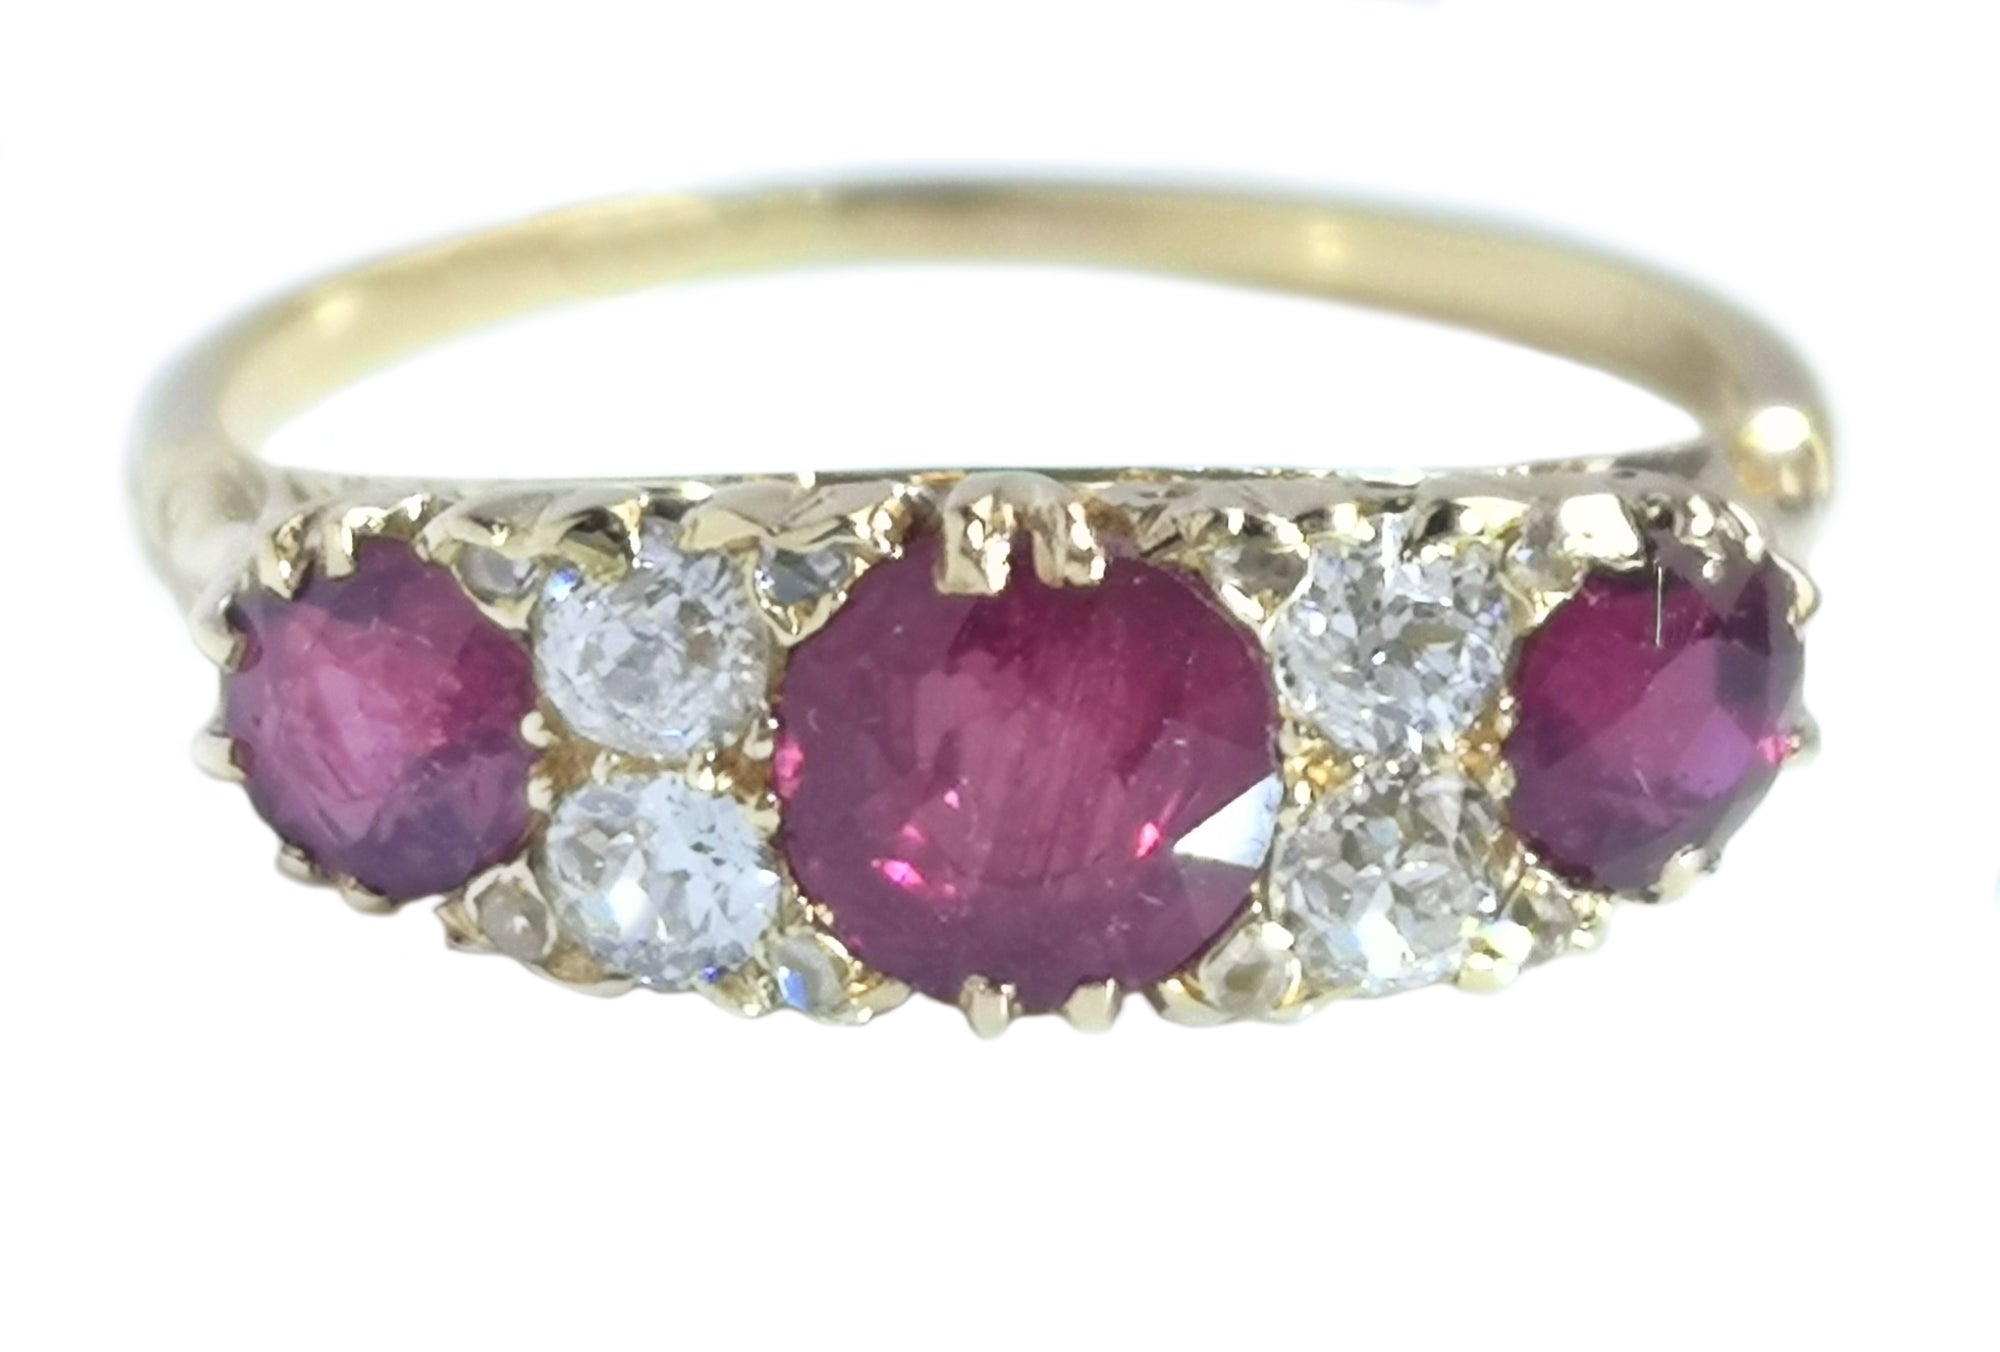 Antique Victorian 1.03tcw Unheated Ruby & Old Cut Diamond Engagement Ring